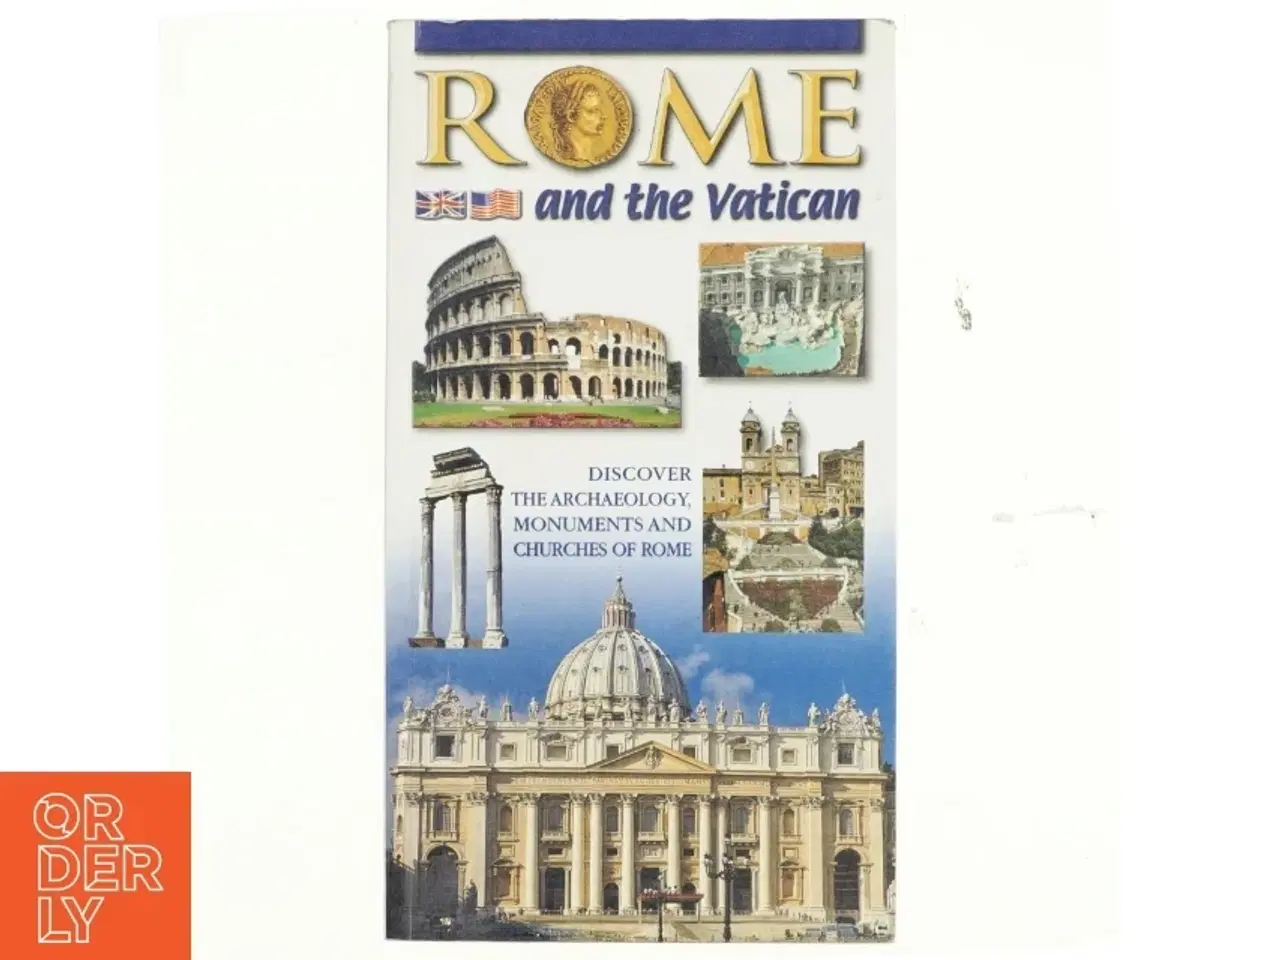 Billede 1 - Rome and the Vatican. Discover the archaeology and monuments of Rome af Lozzi Roma (Bog)